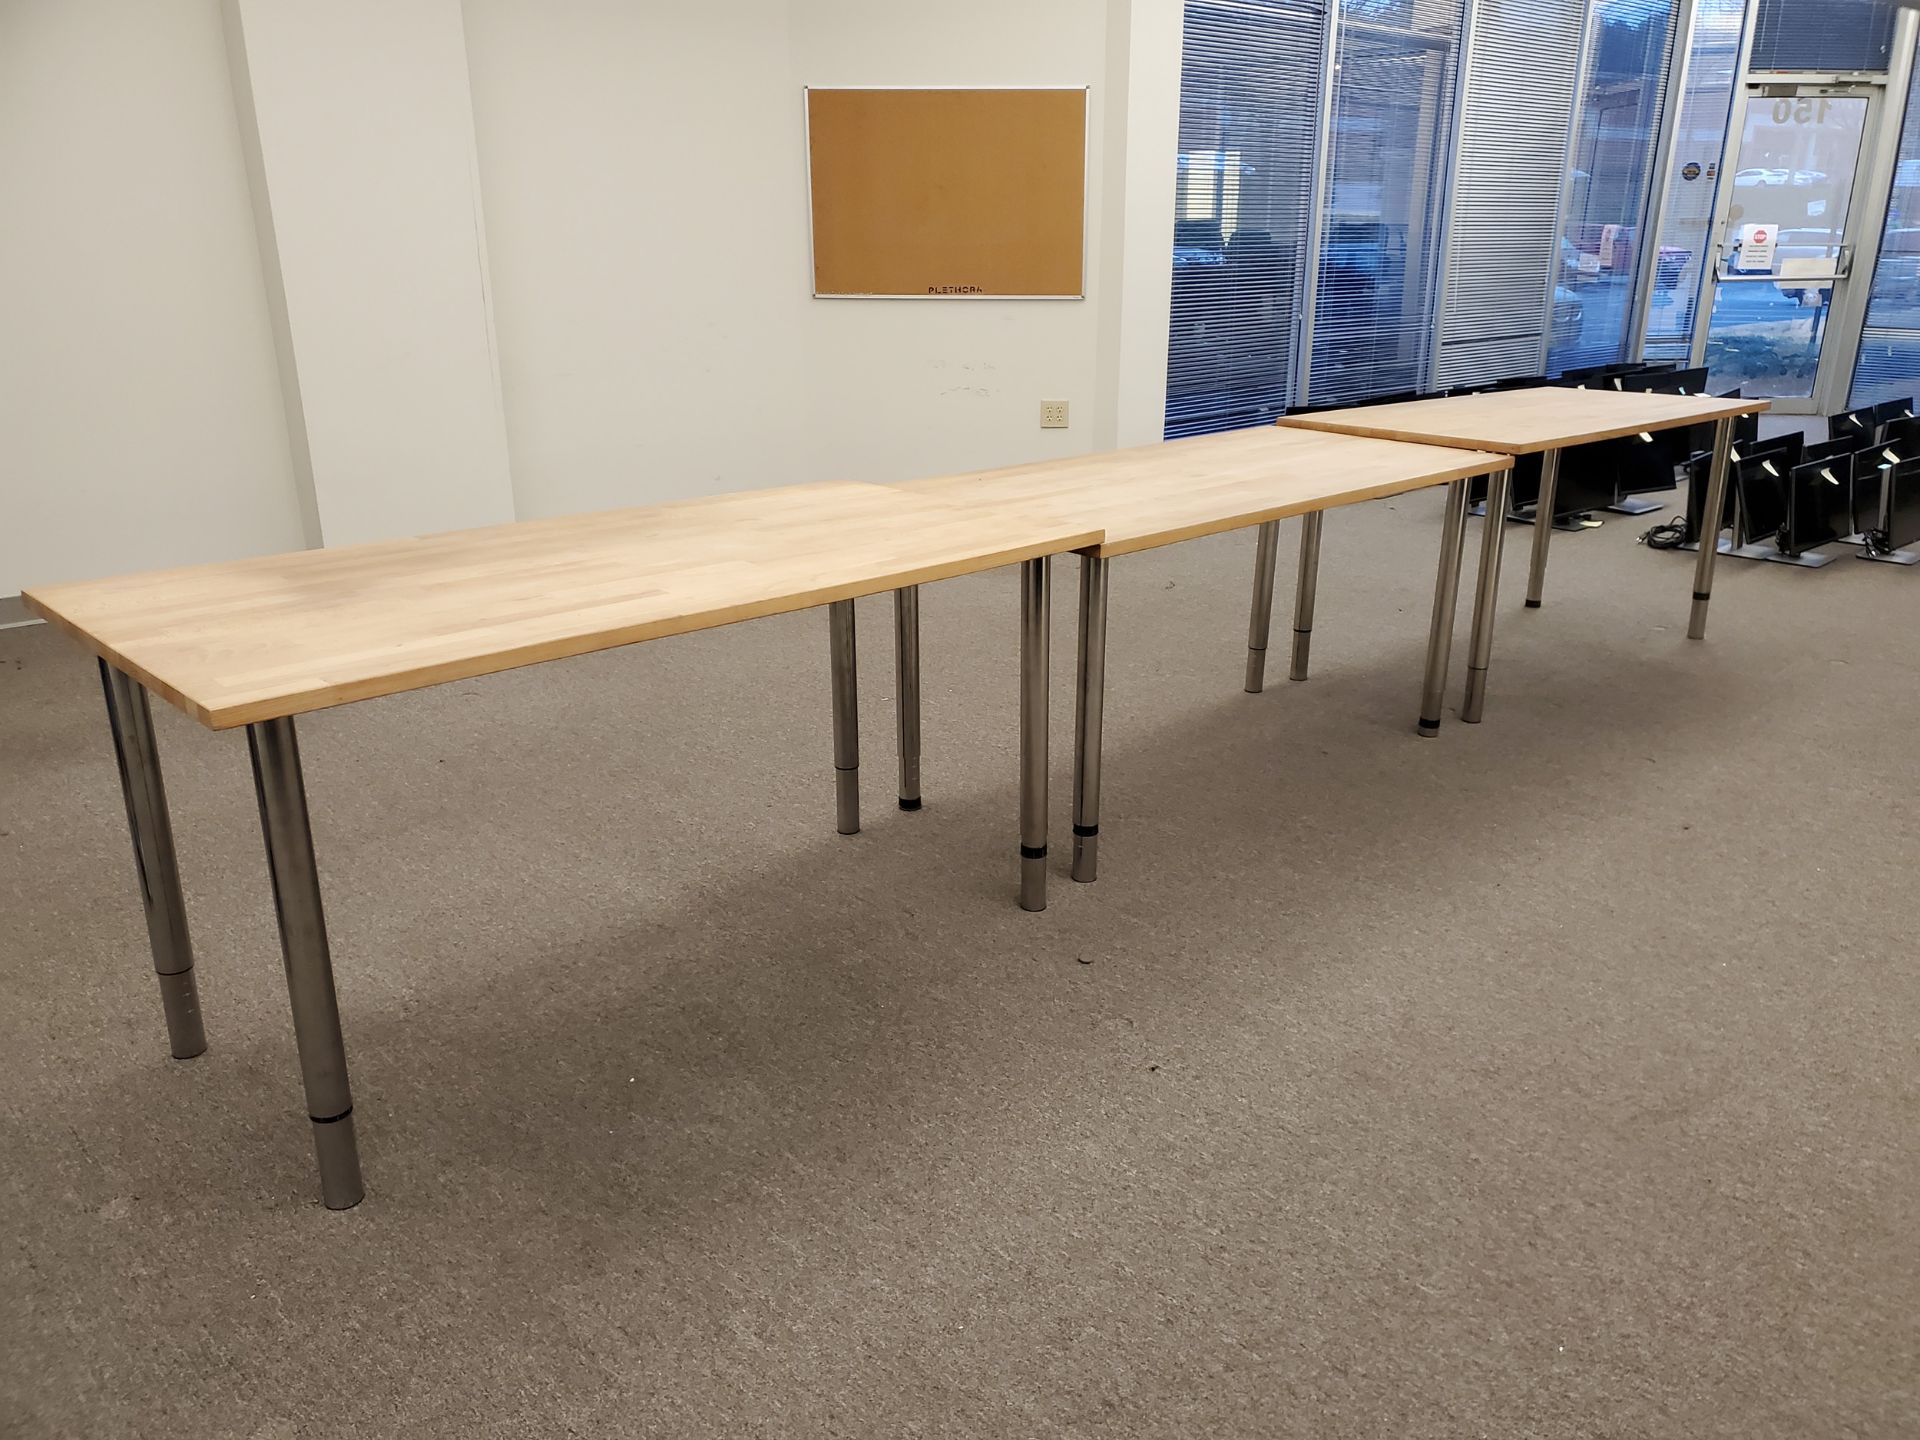 (3) 30" x 61" Adjustable Height Wood Top Tables